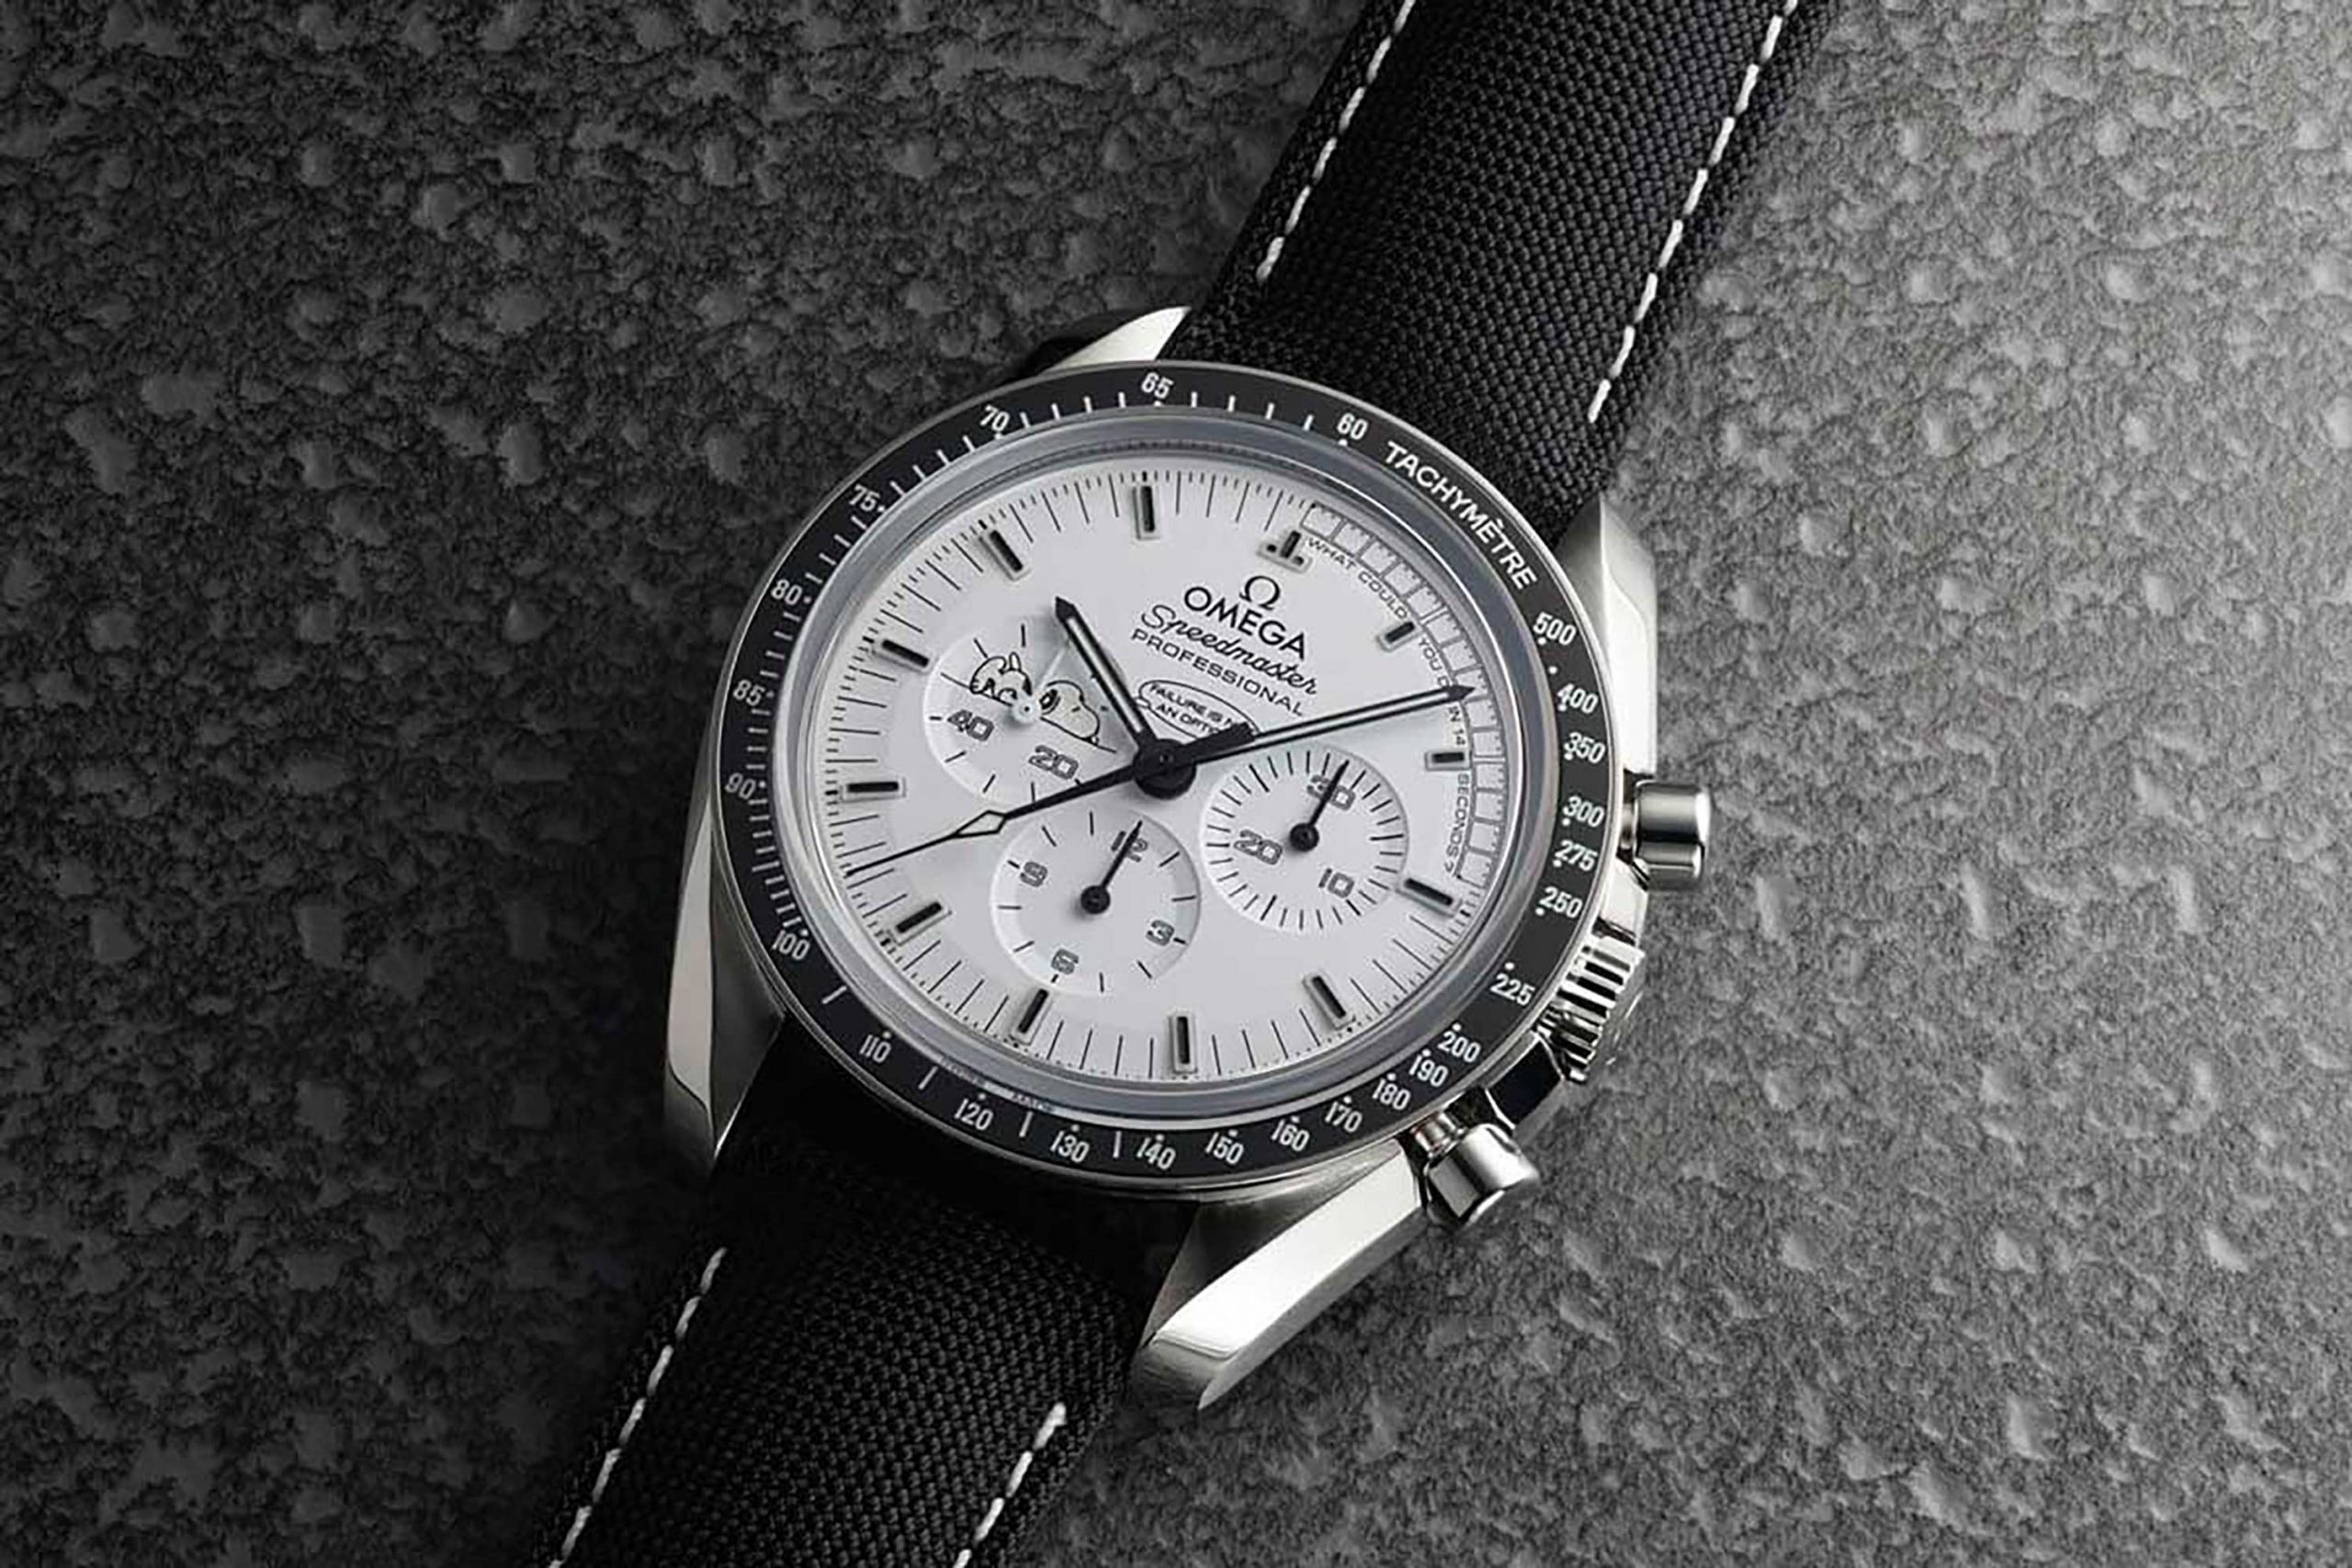 Available in the shop: The Omega Speedmaster Apollo 13 Silver Snoopy